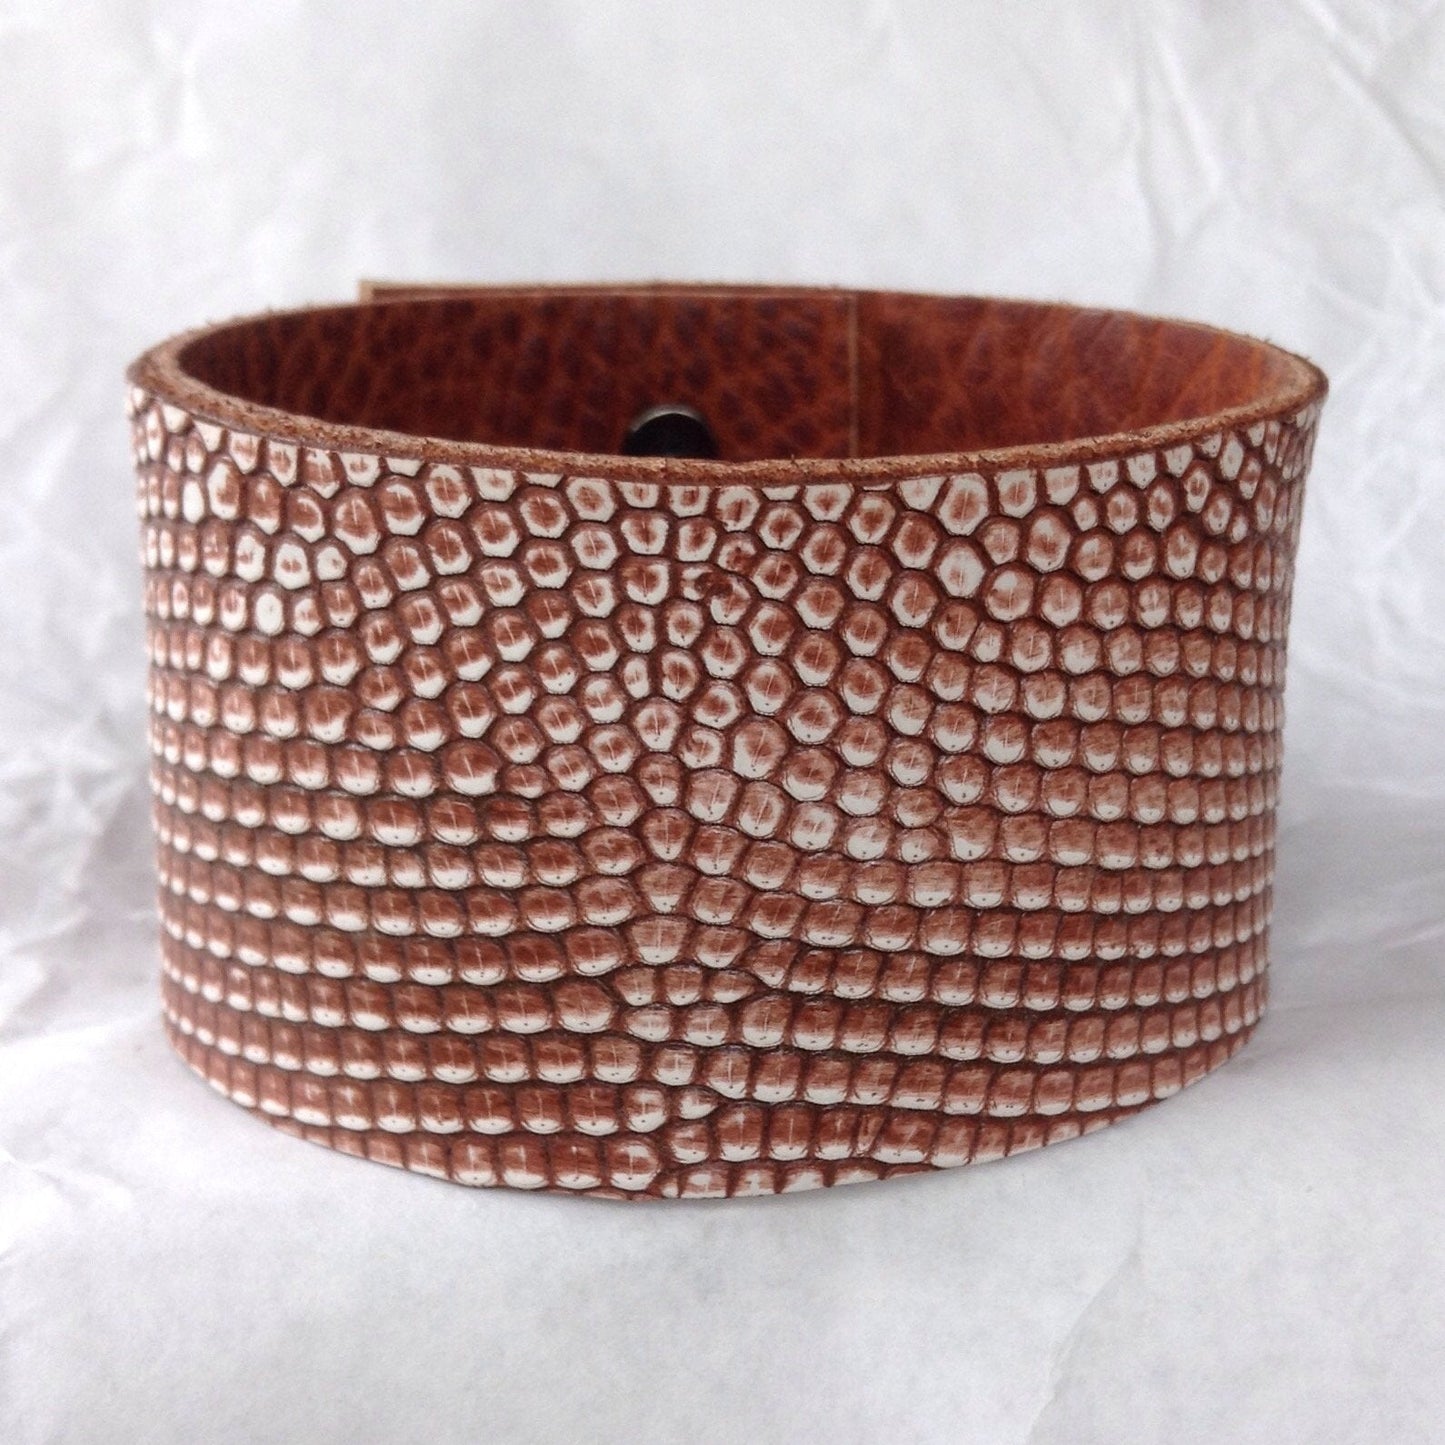 Leather Cuff, reptile leather and textured bull leather bangle.